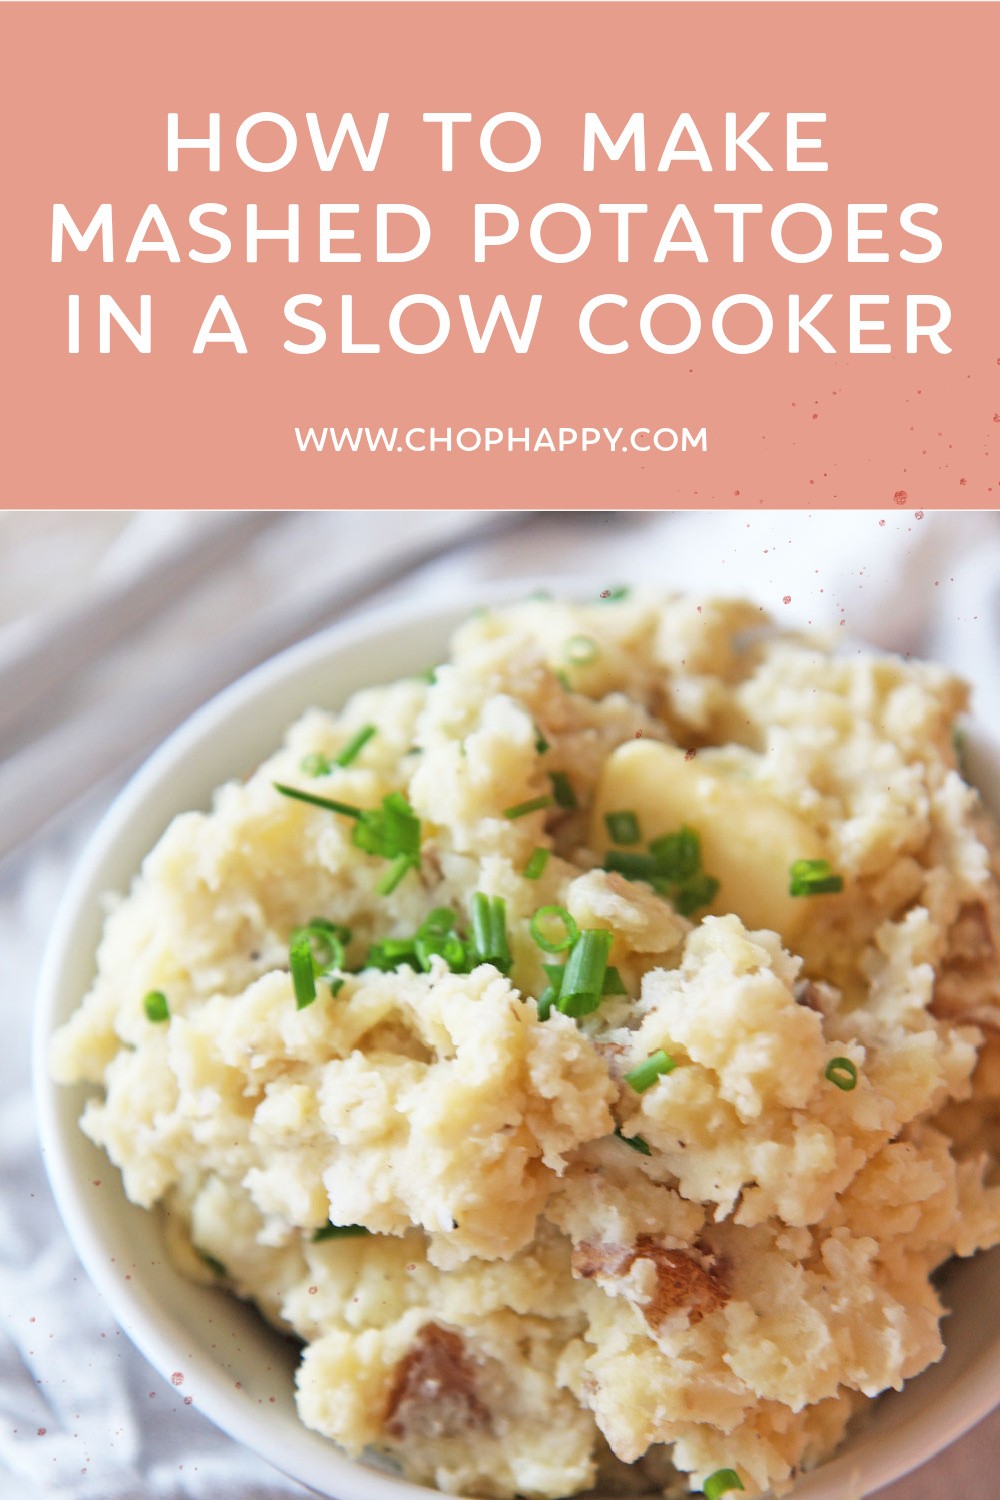 How to Make Mashed Potatoes in a Slow Cooker. Grab potatoes, broth, sour cream, and cheese. This is perfect for the holidays and busy day recipes. www.ChopHappy.com #howtomakemashedpotatoes #slowcookermashedpotatoes